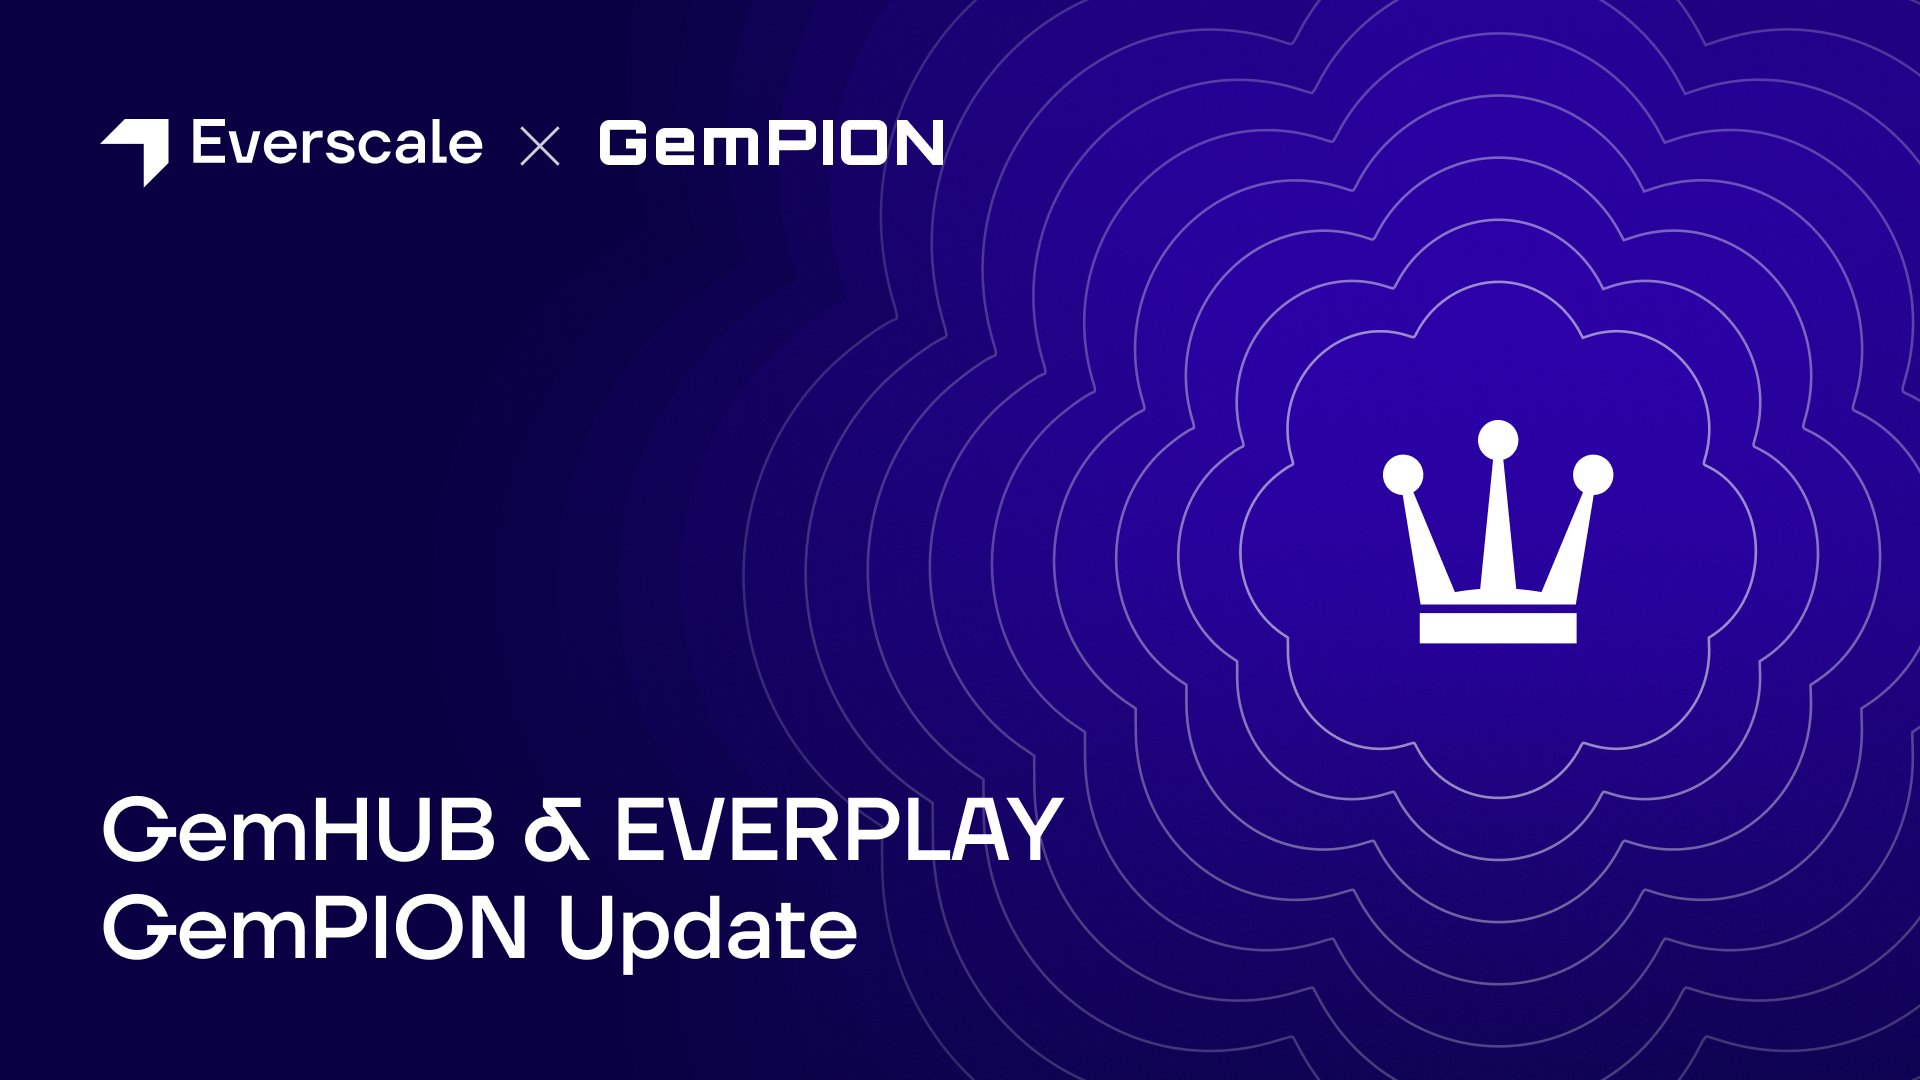 Everscale on X: GemHUB & EVERPLAY GemPION Update 🎮 🥇 Gaming Tournaments  & Rewards:  now hosts daily tournaments for games  like Number Shot, Jelly Snake, Find Bird, Push Push Cat, Mayan